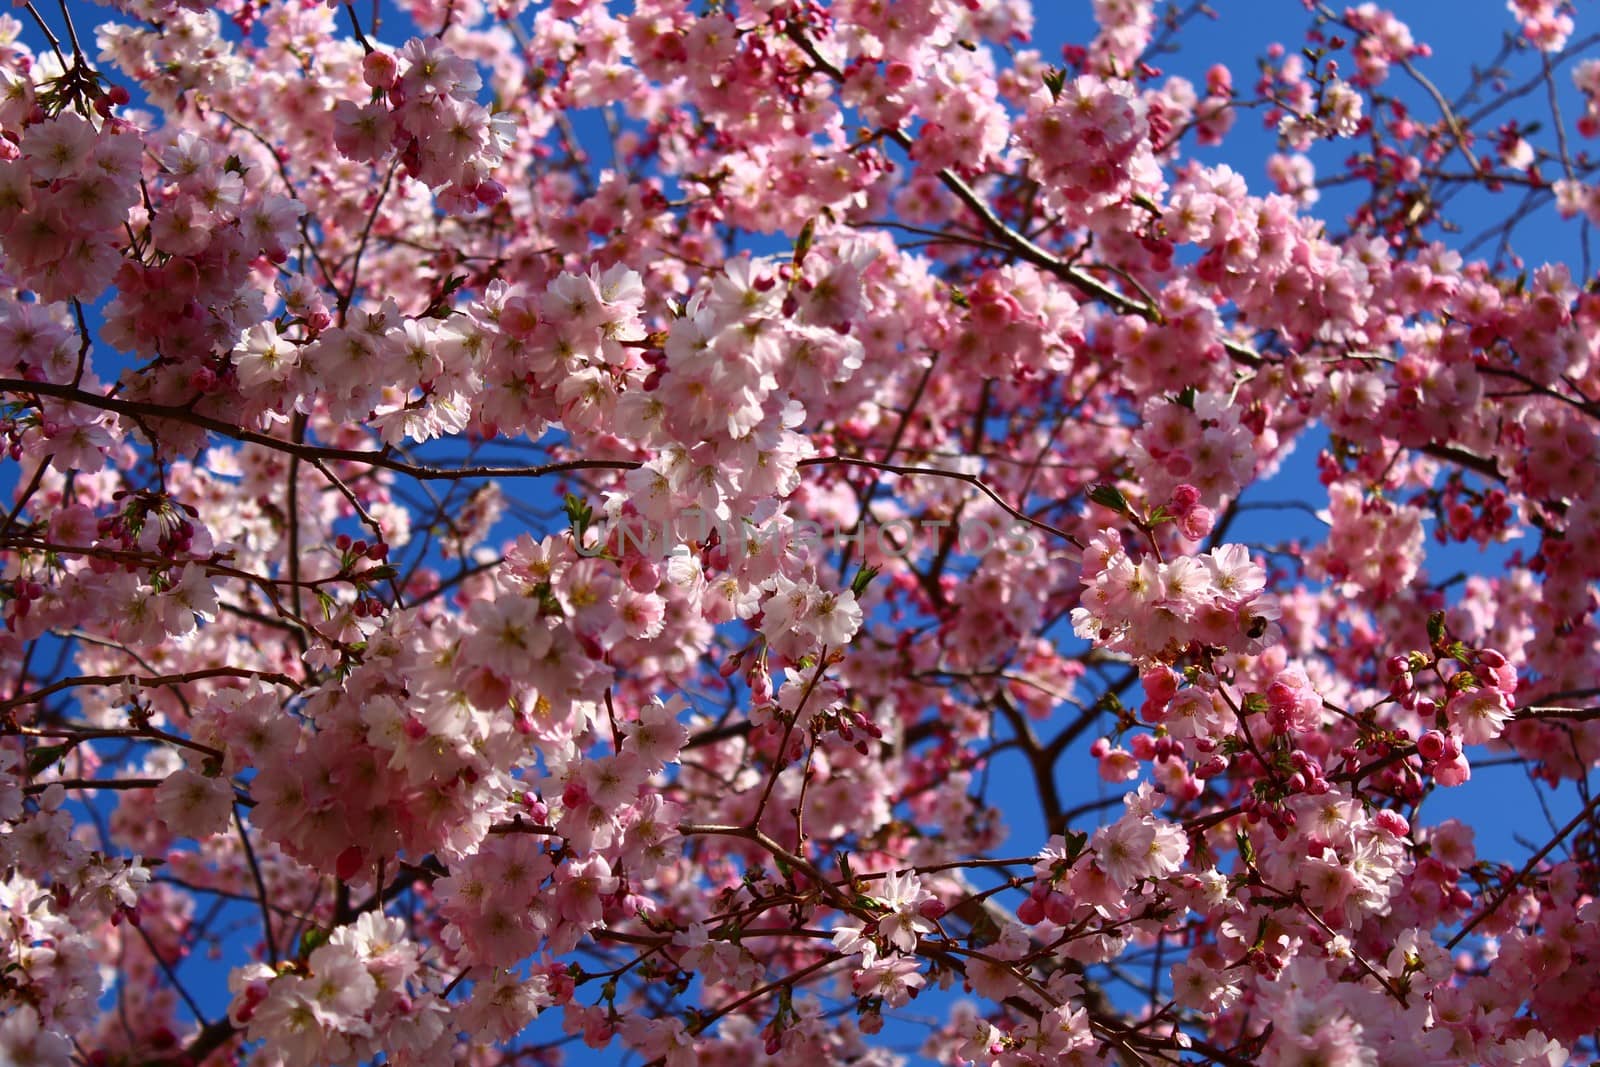 pink blossoms in the spring in front of the blue sky by martina_unbehauen